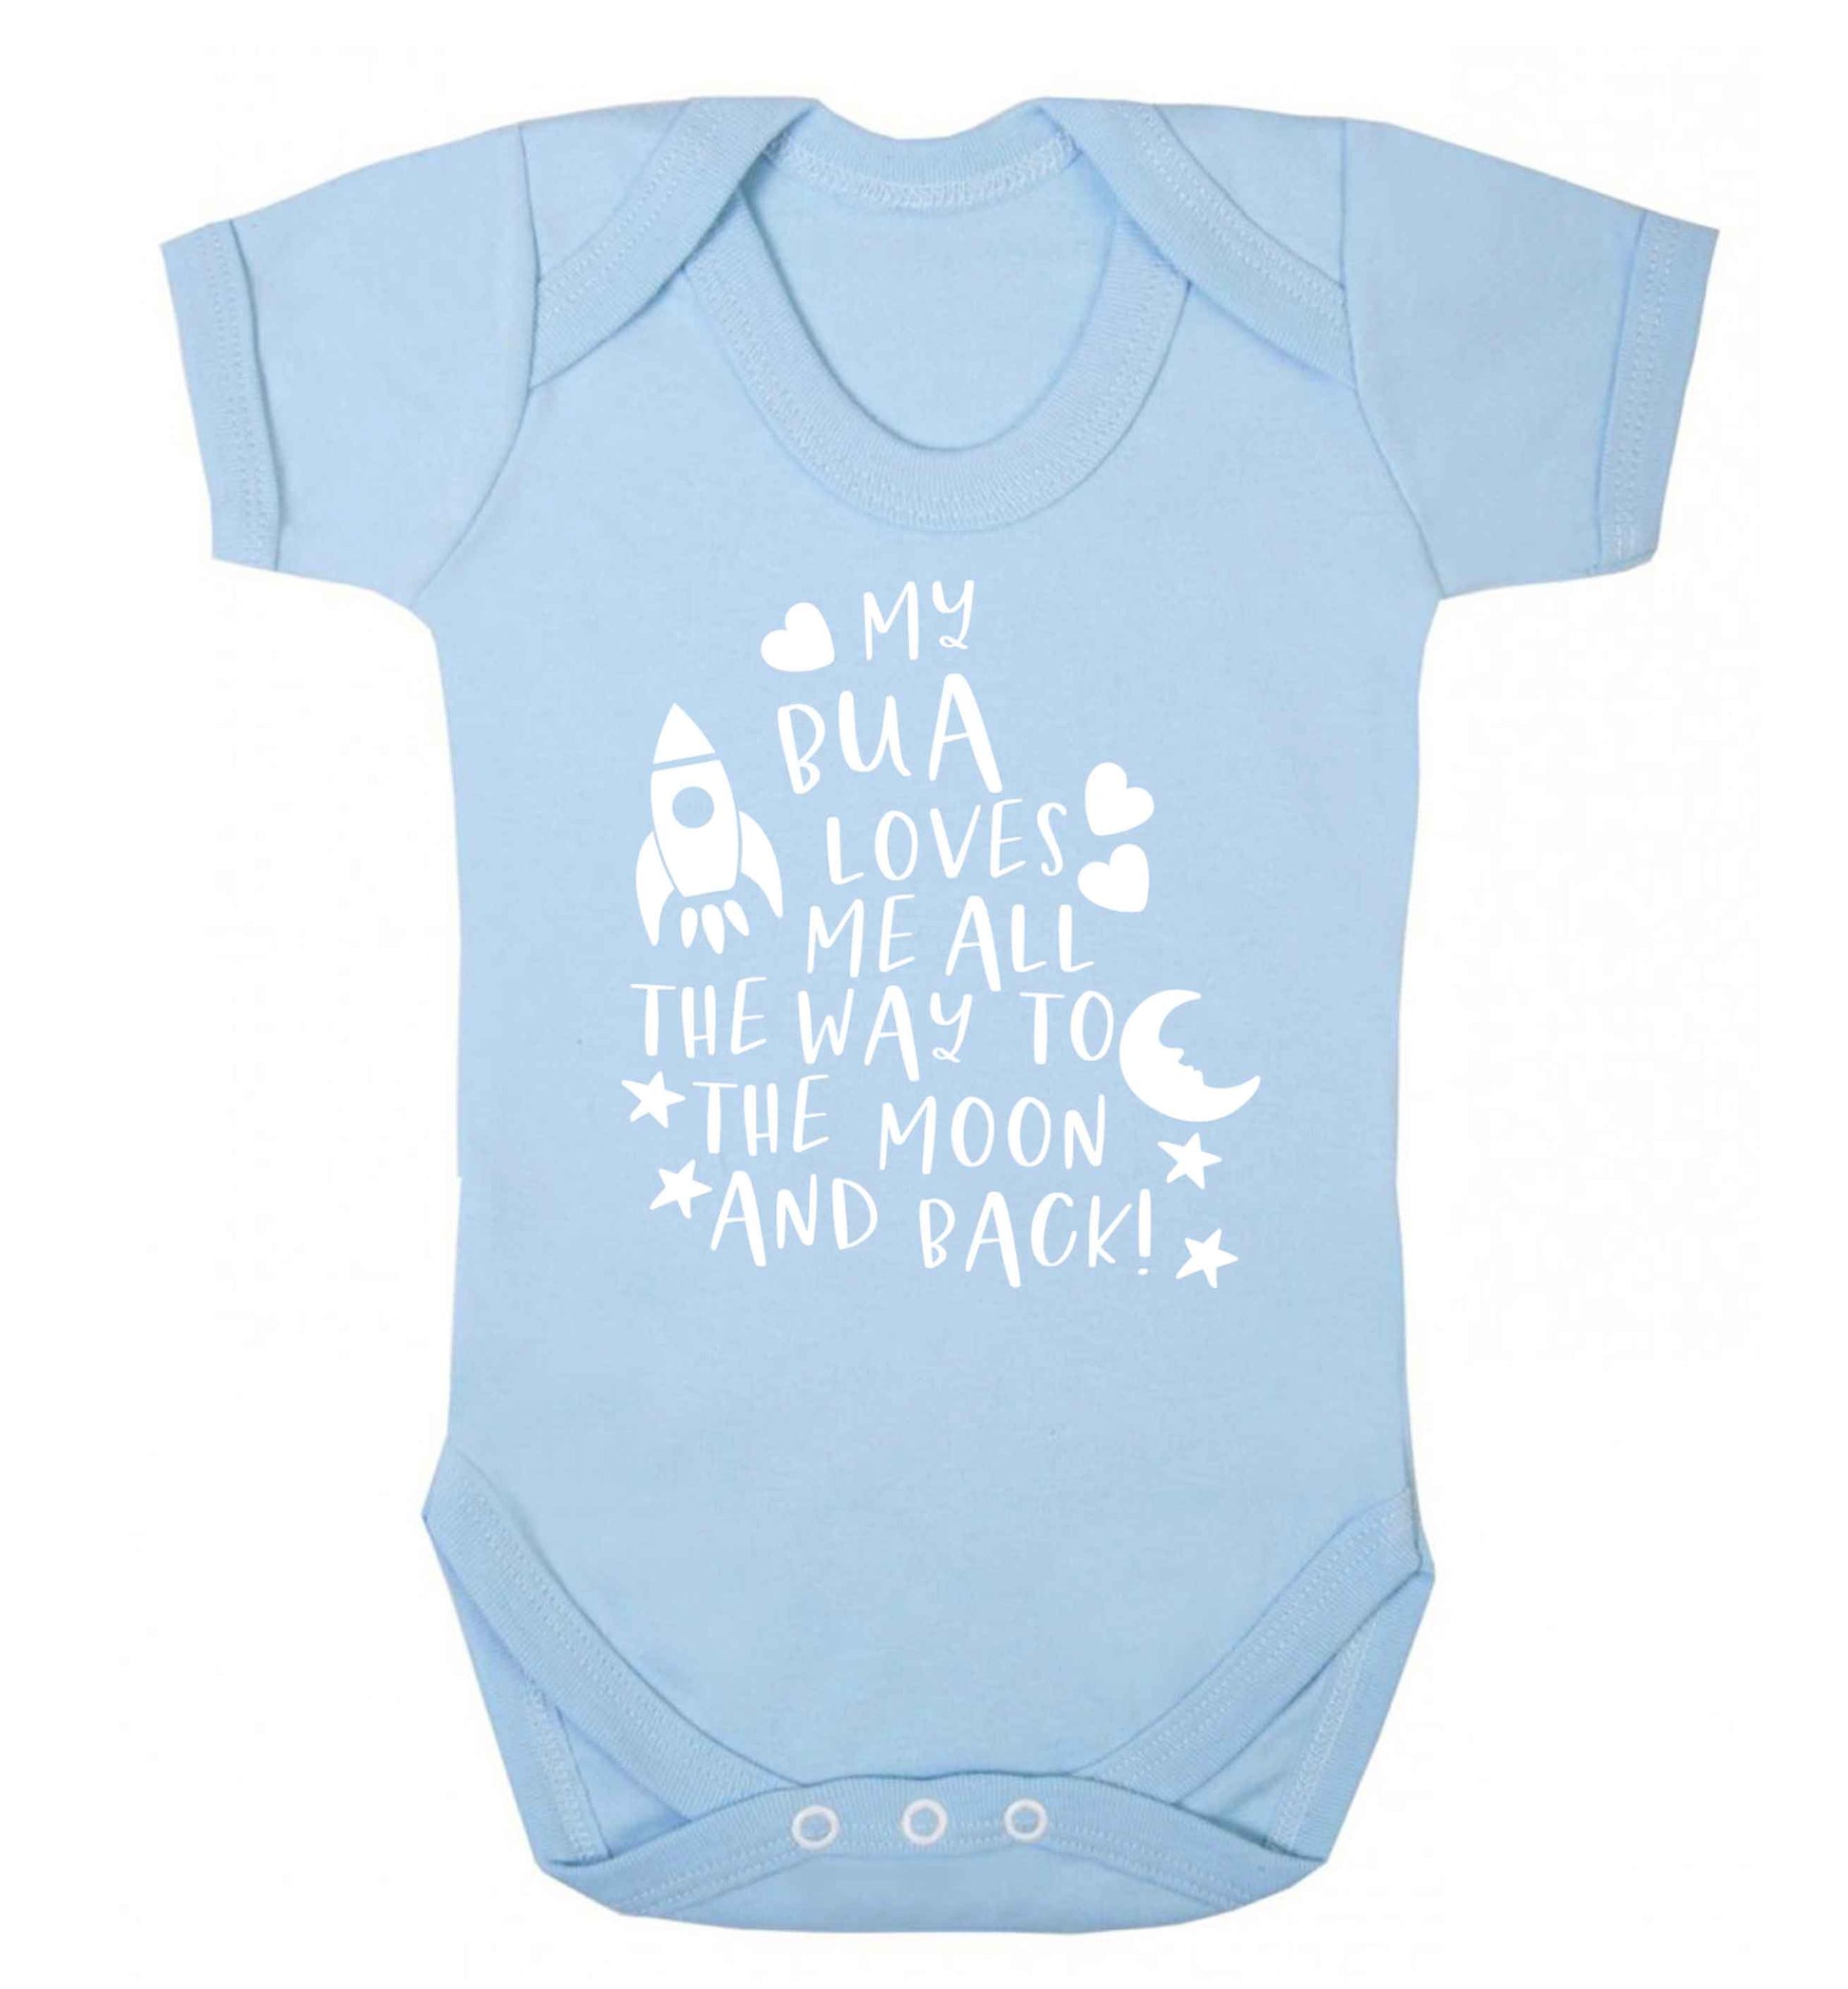 My bua loves me all they way to the moon and back Baby Vest pale blue 18-24 months